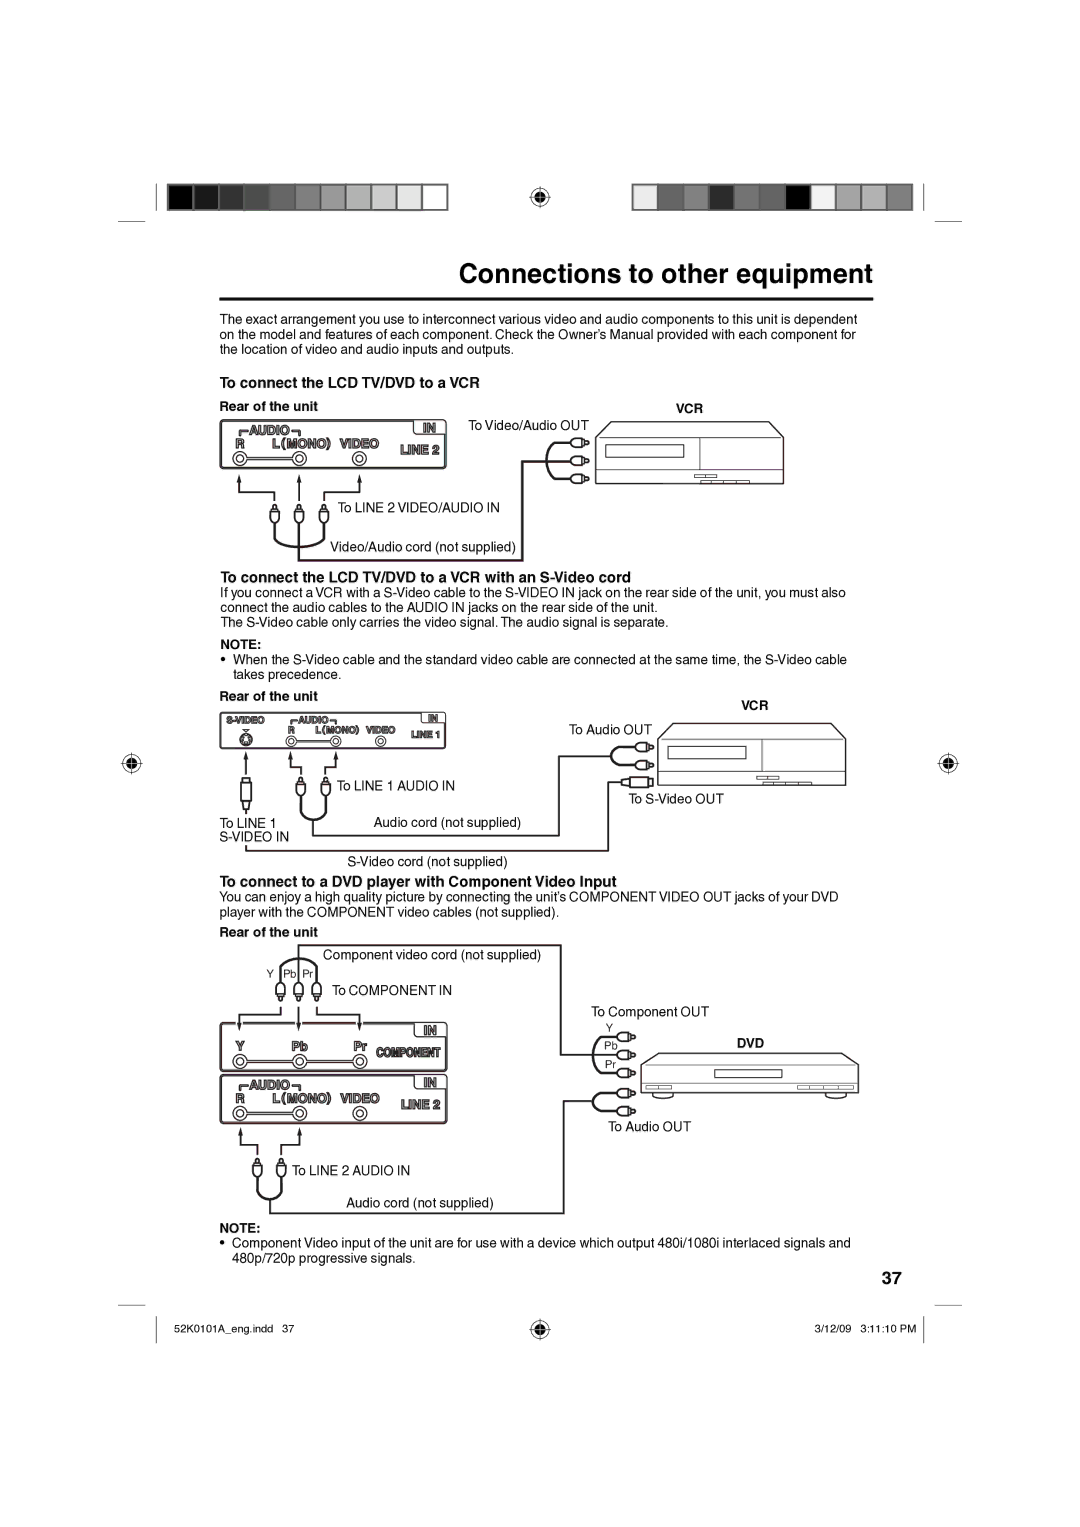 RCA L32HD35D, L26HD35D owner manual Connections to other equipment, To connect the LCD TV/DVD to a VCR, Dvd 